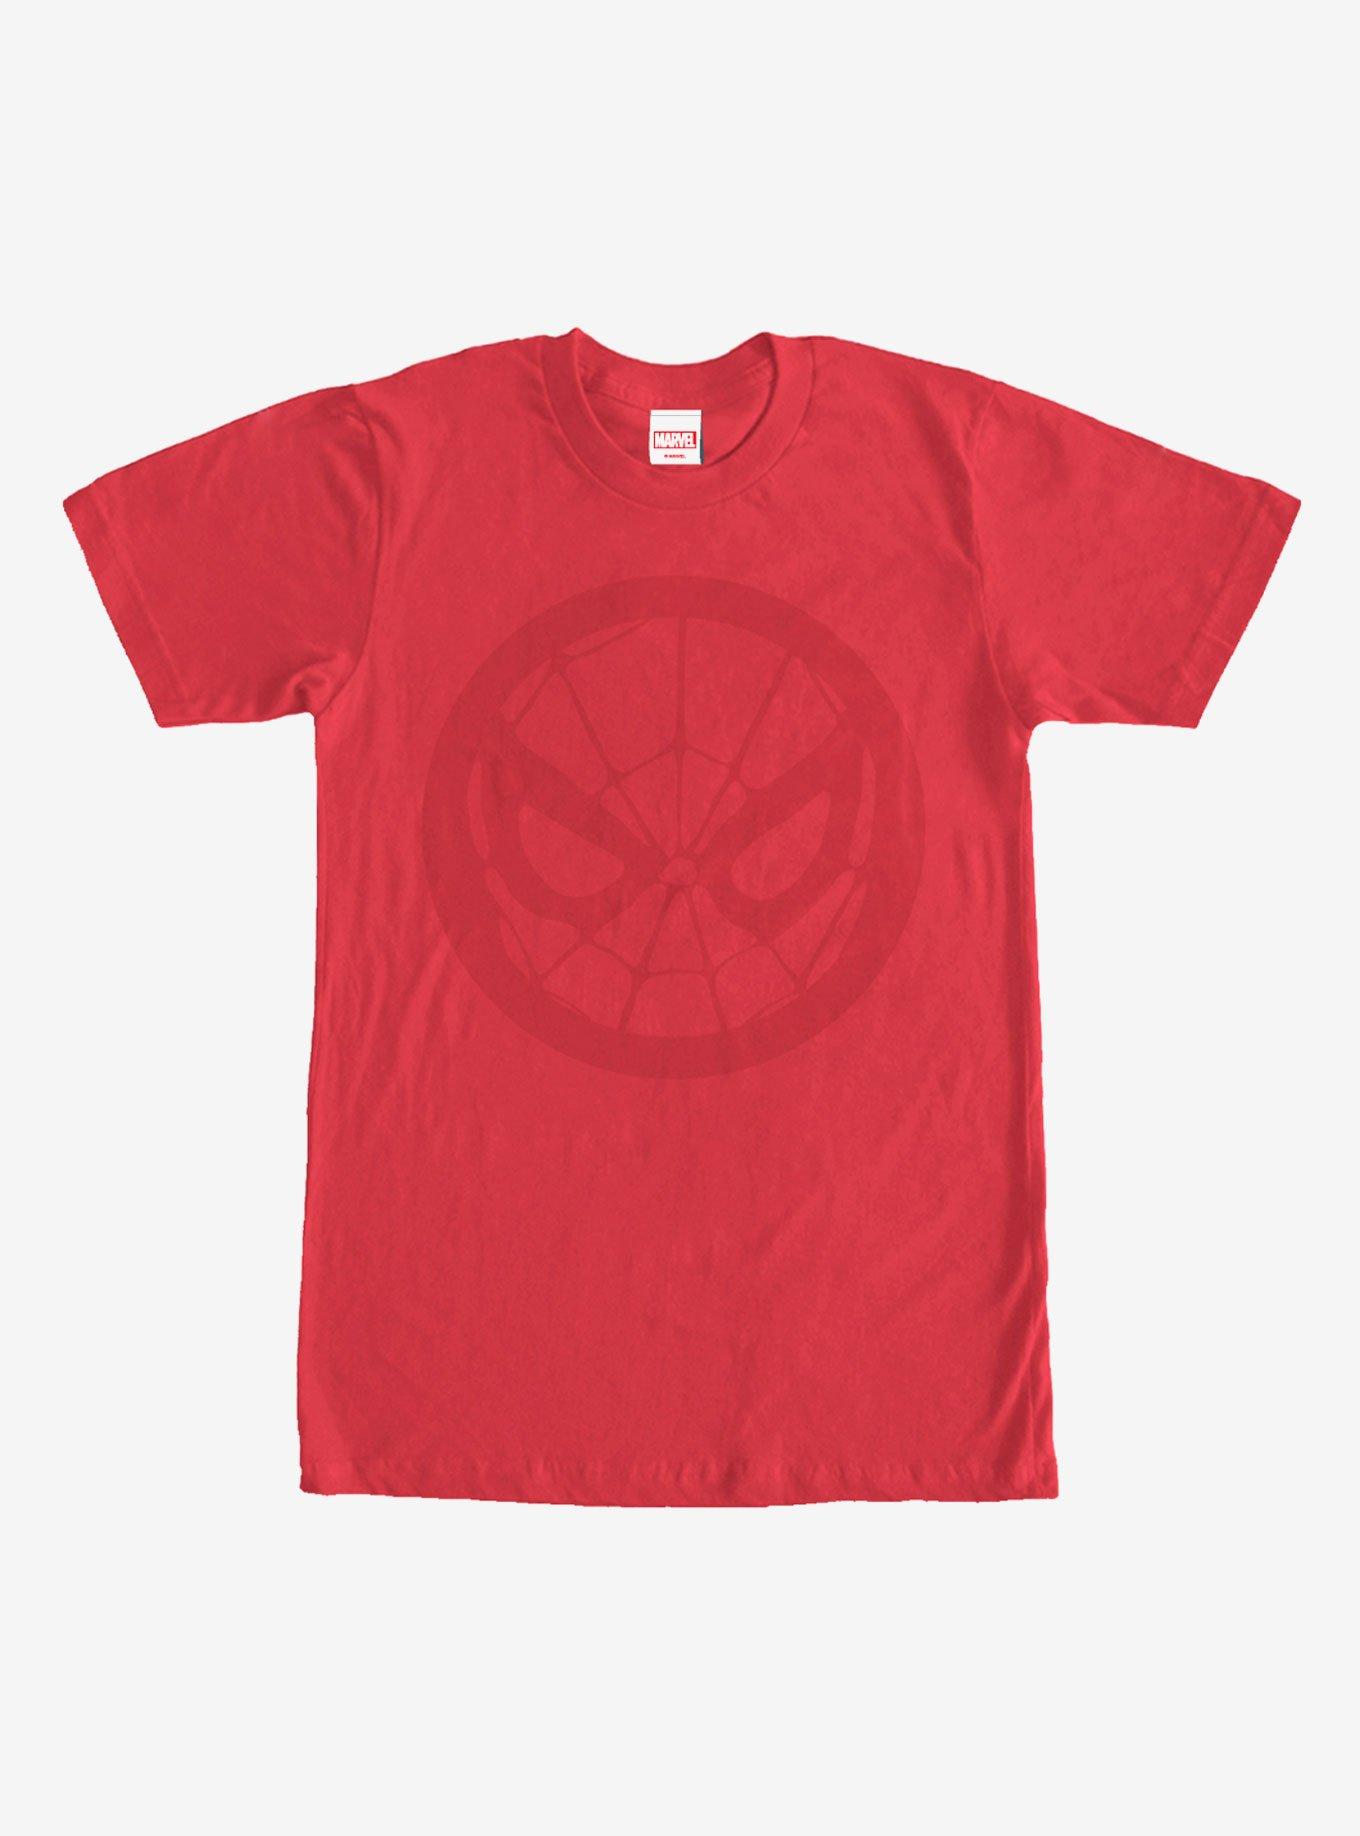 Marvel Spider-Man Mask Circle T-Shirt - RED | BoxLunch